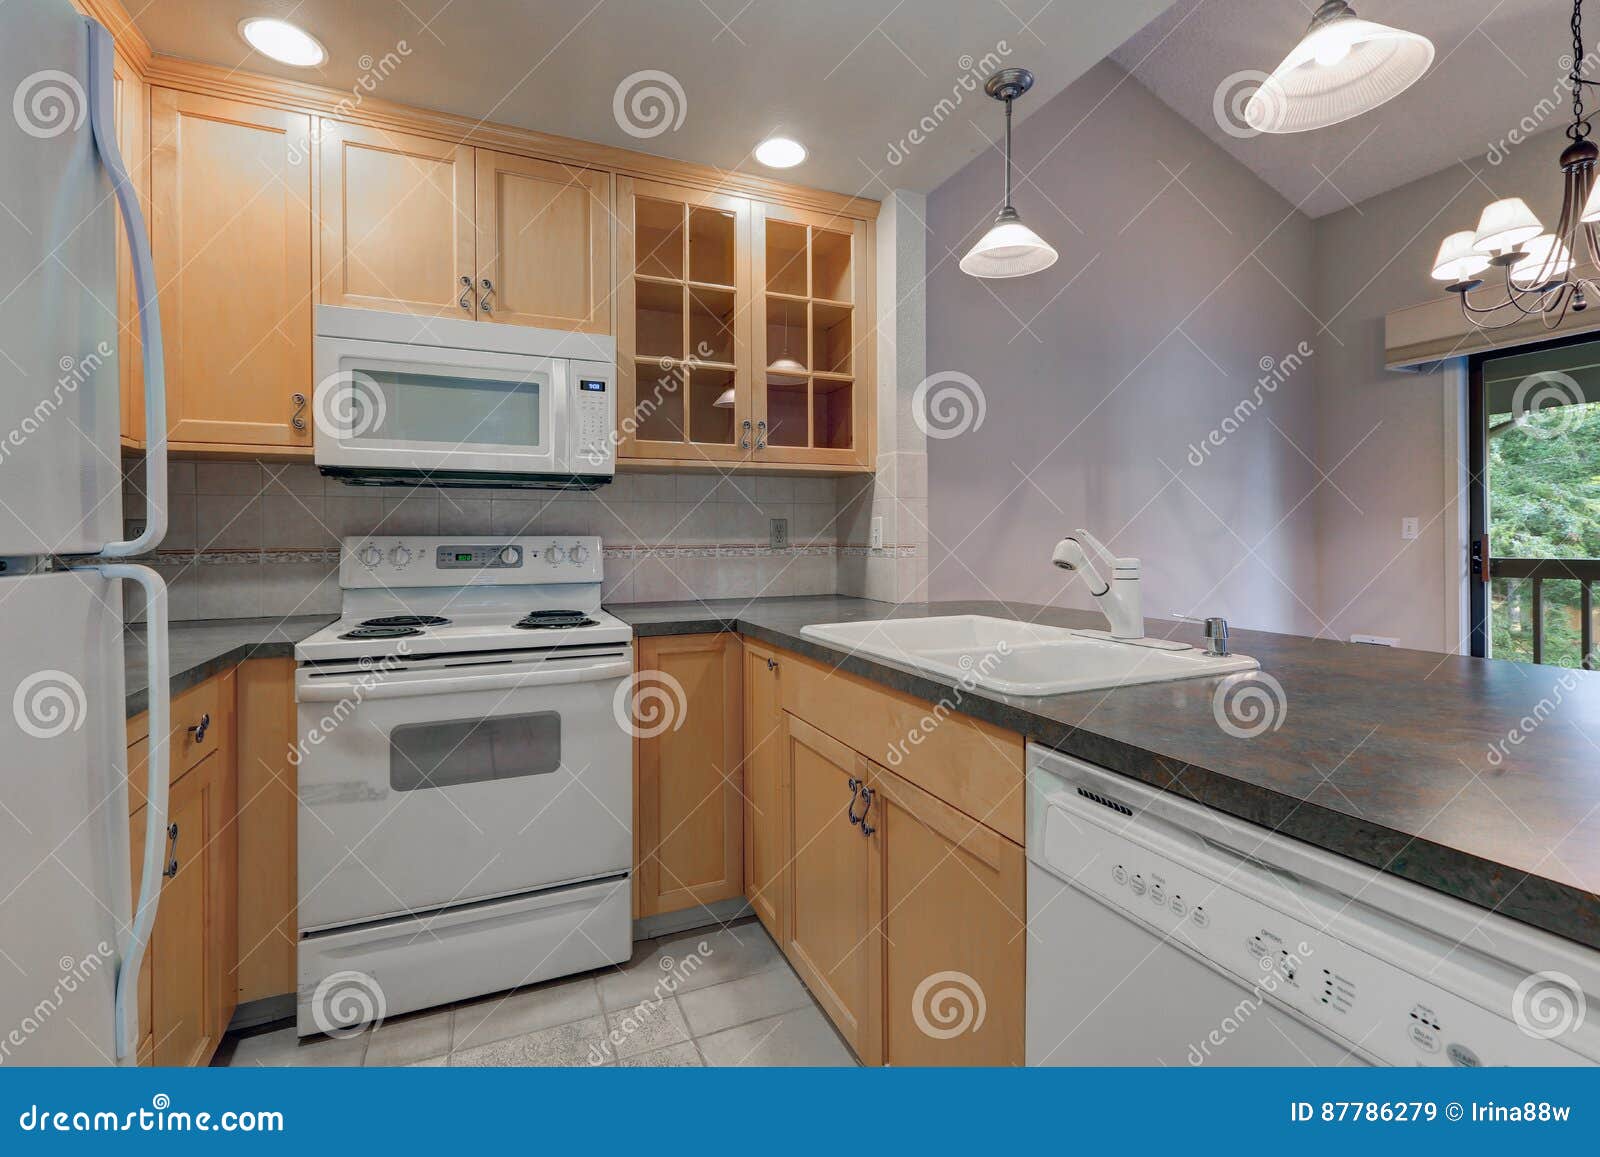 Tidy Compact Kitchen with Maple Cabinets Stock Image   Image of ...